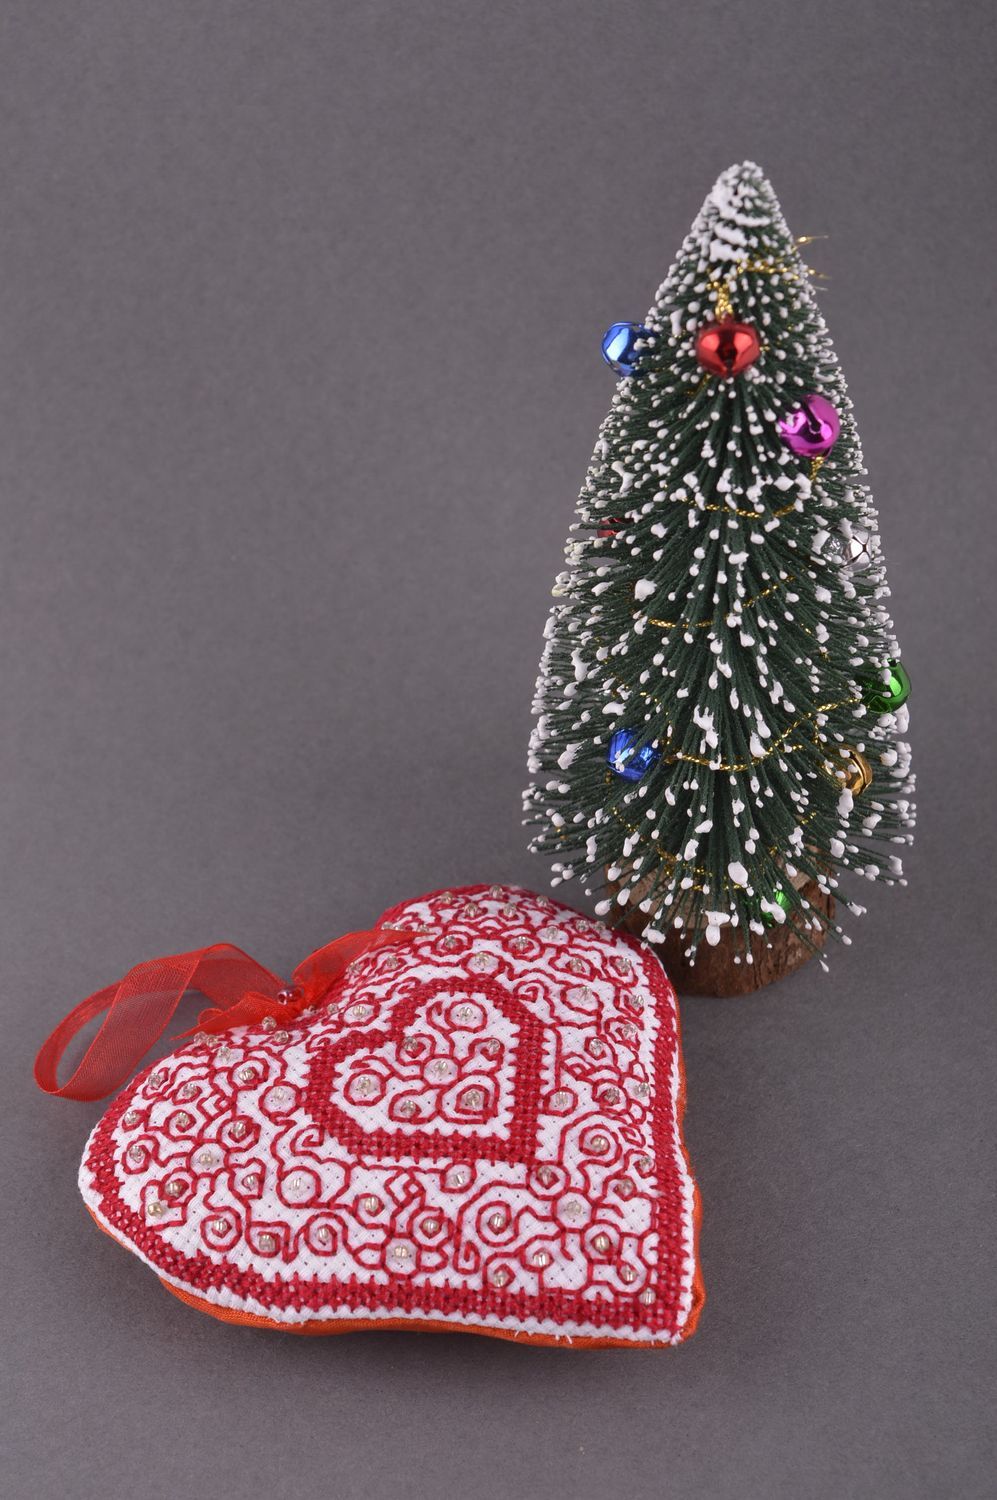 Homemade Christmas decor soft toy heart toy for decorative use Christmas gifts photo 1